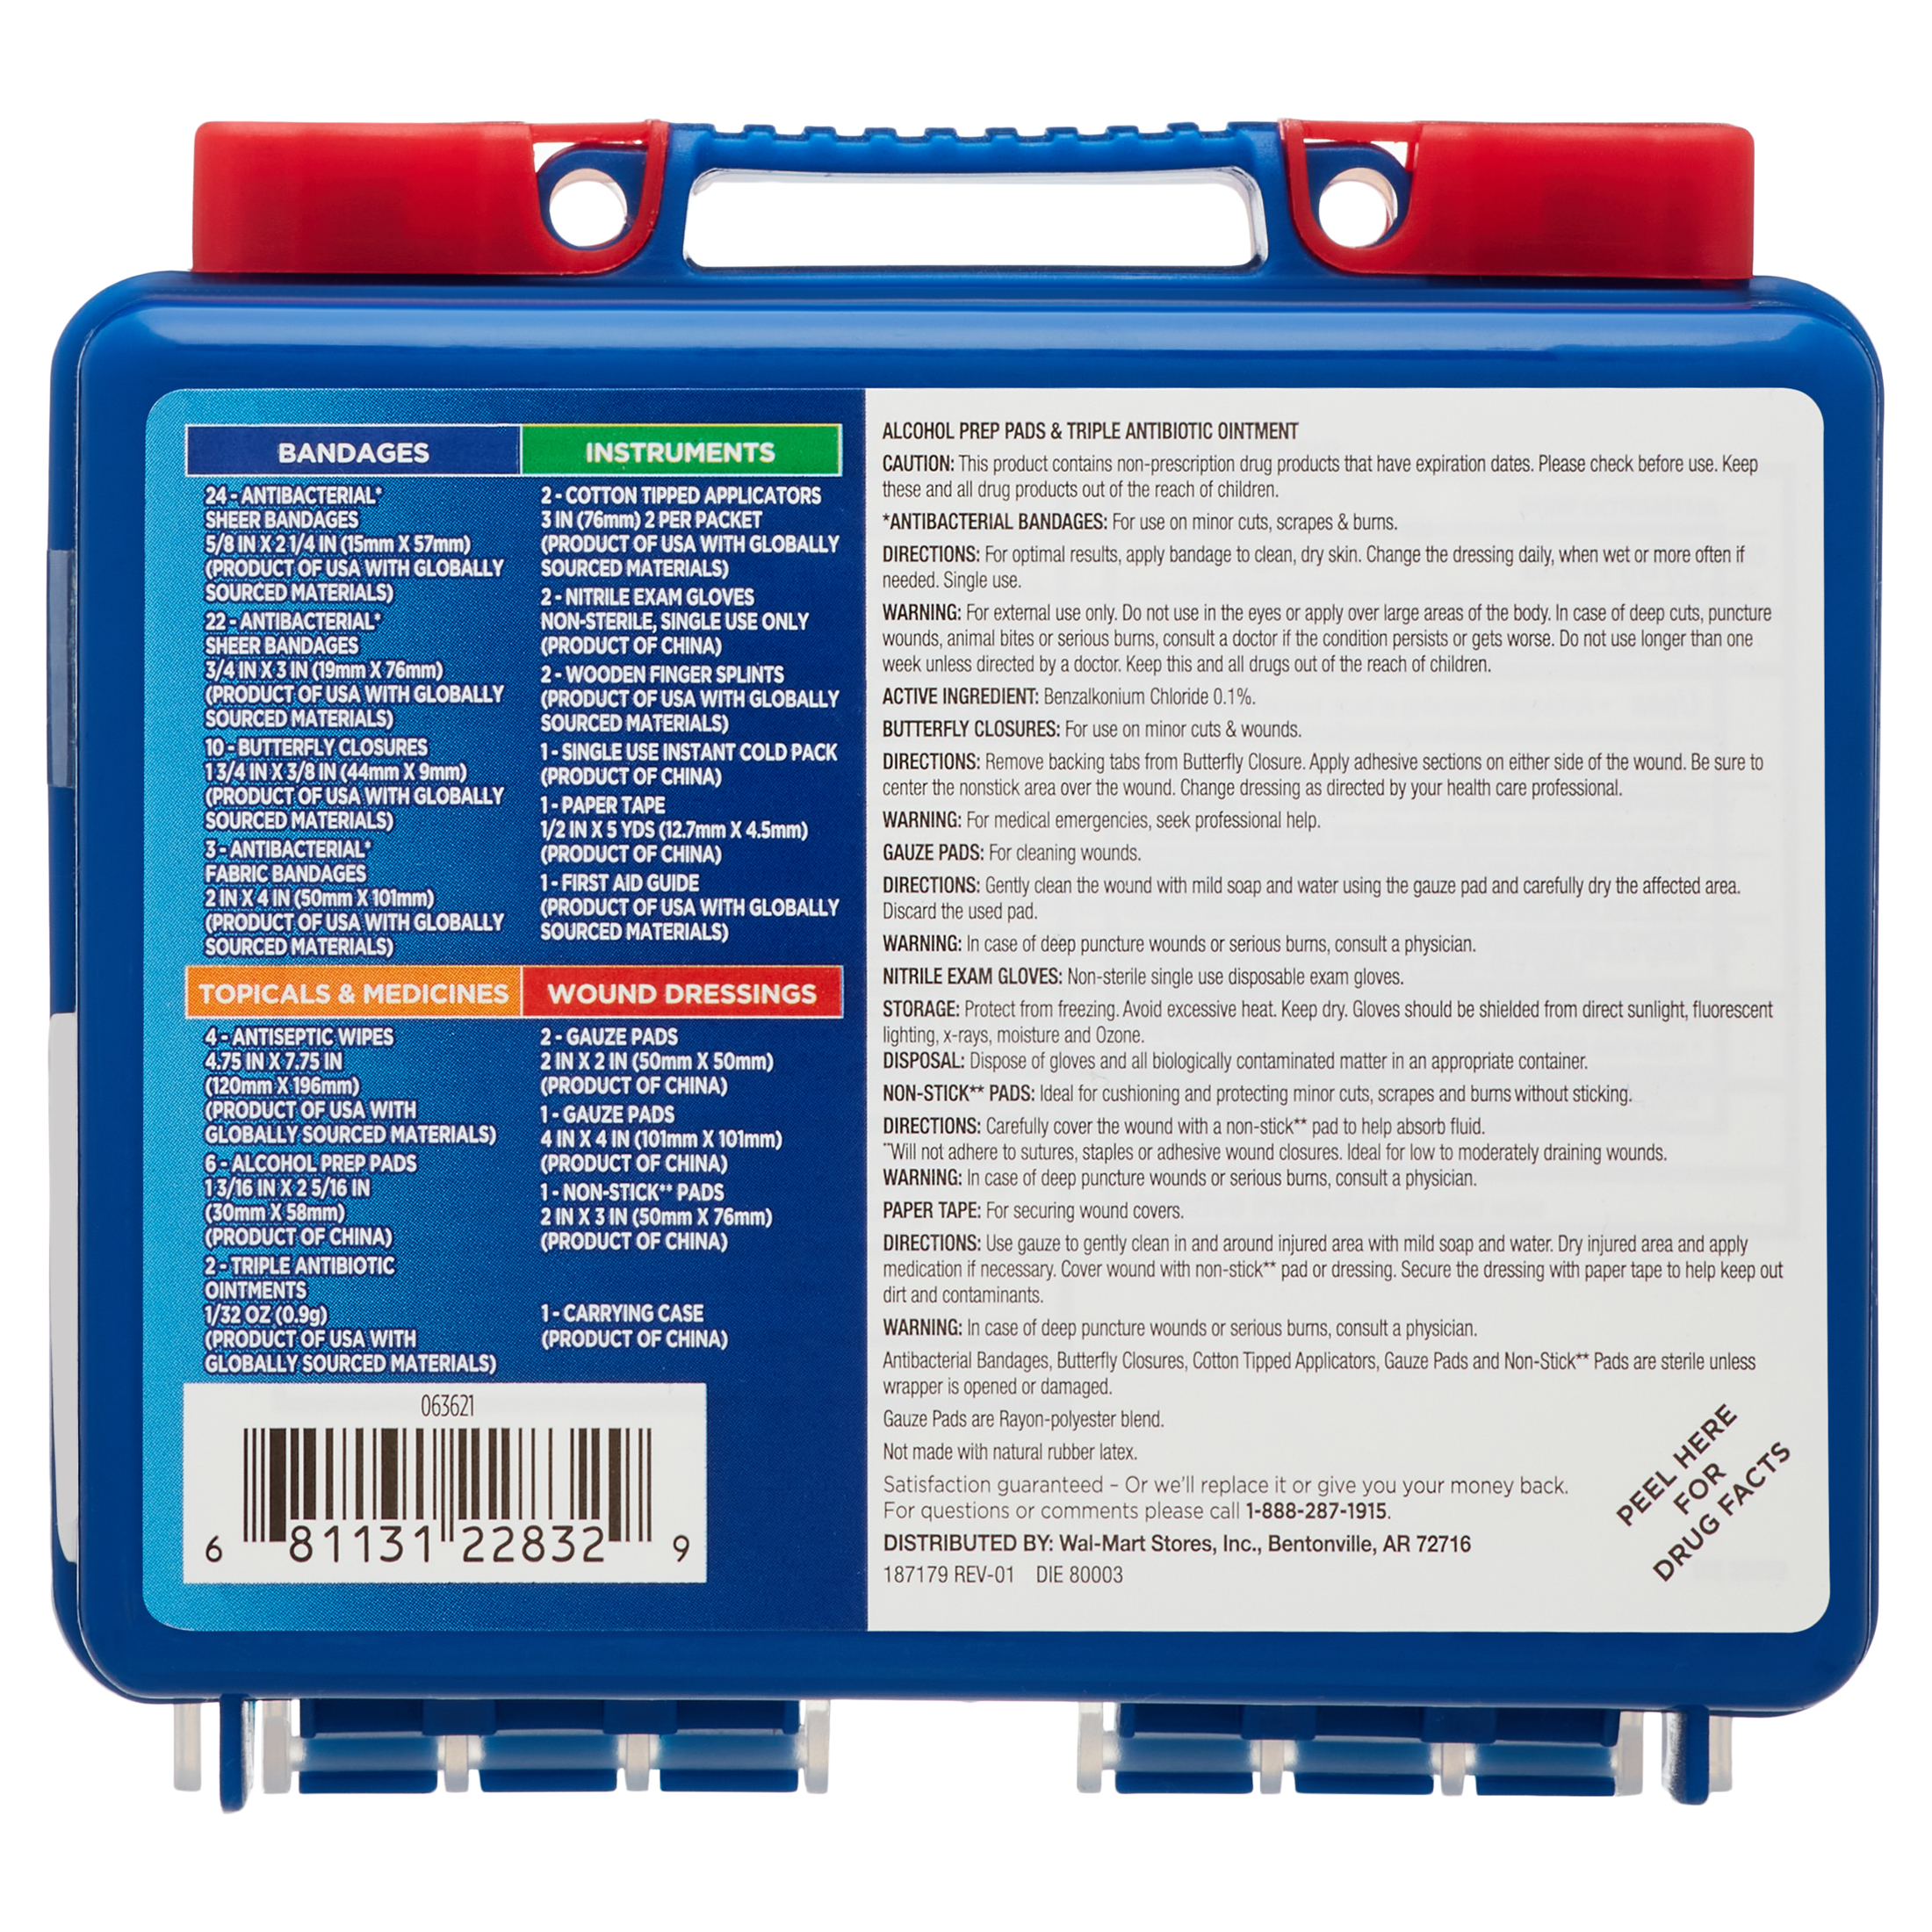 Equate On-The-Go First Aid Kit, 85 Items - image 8 of 9